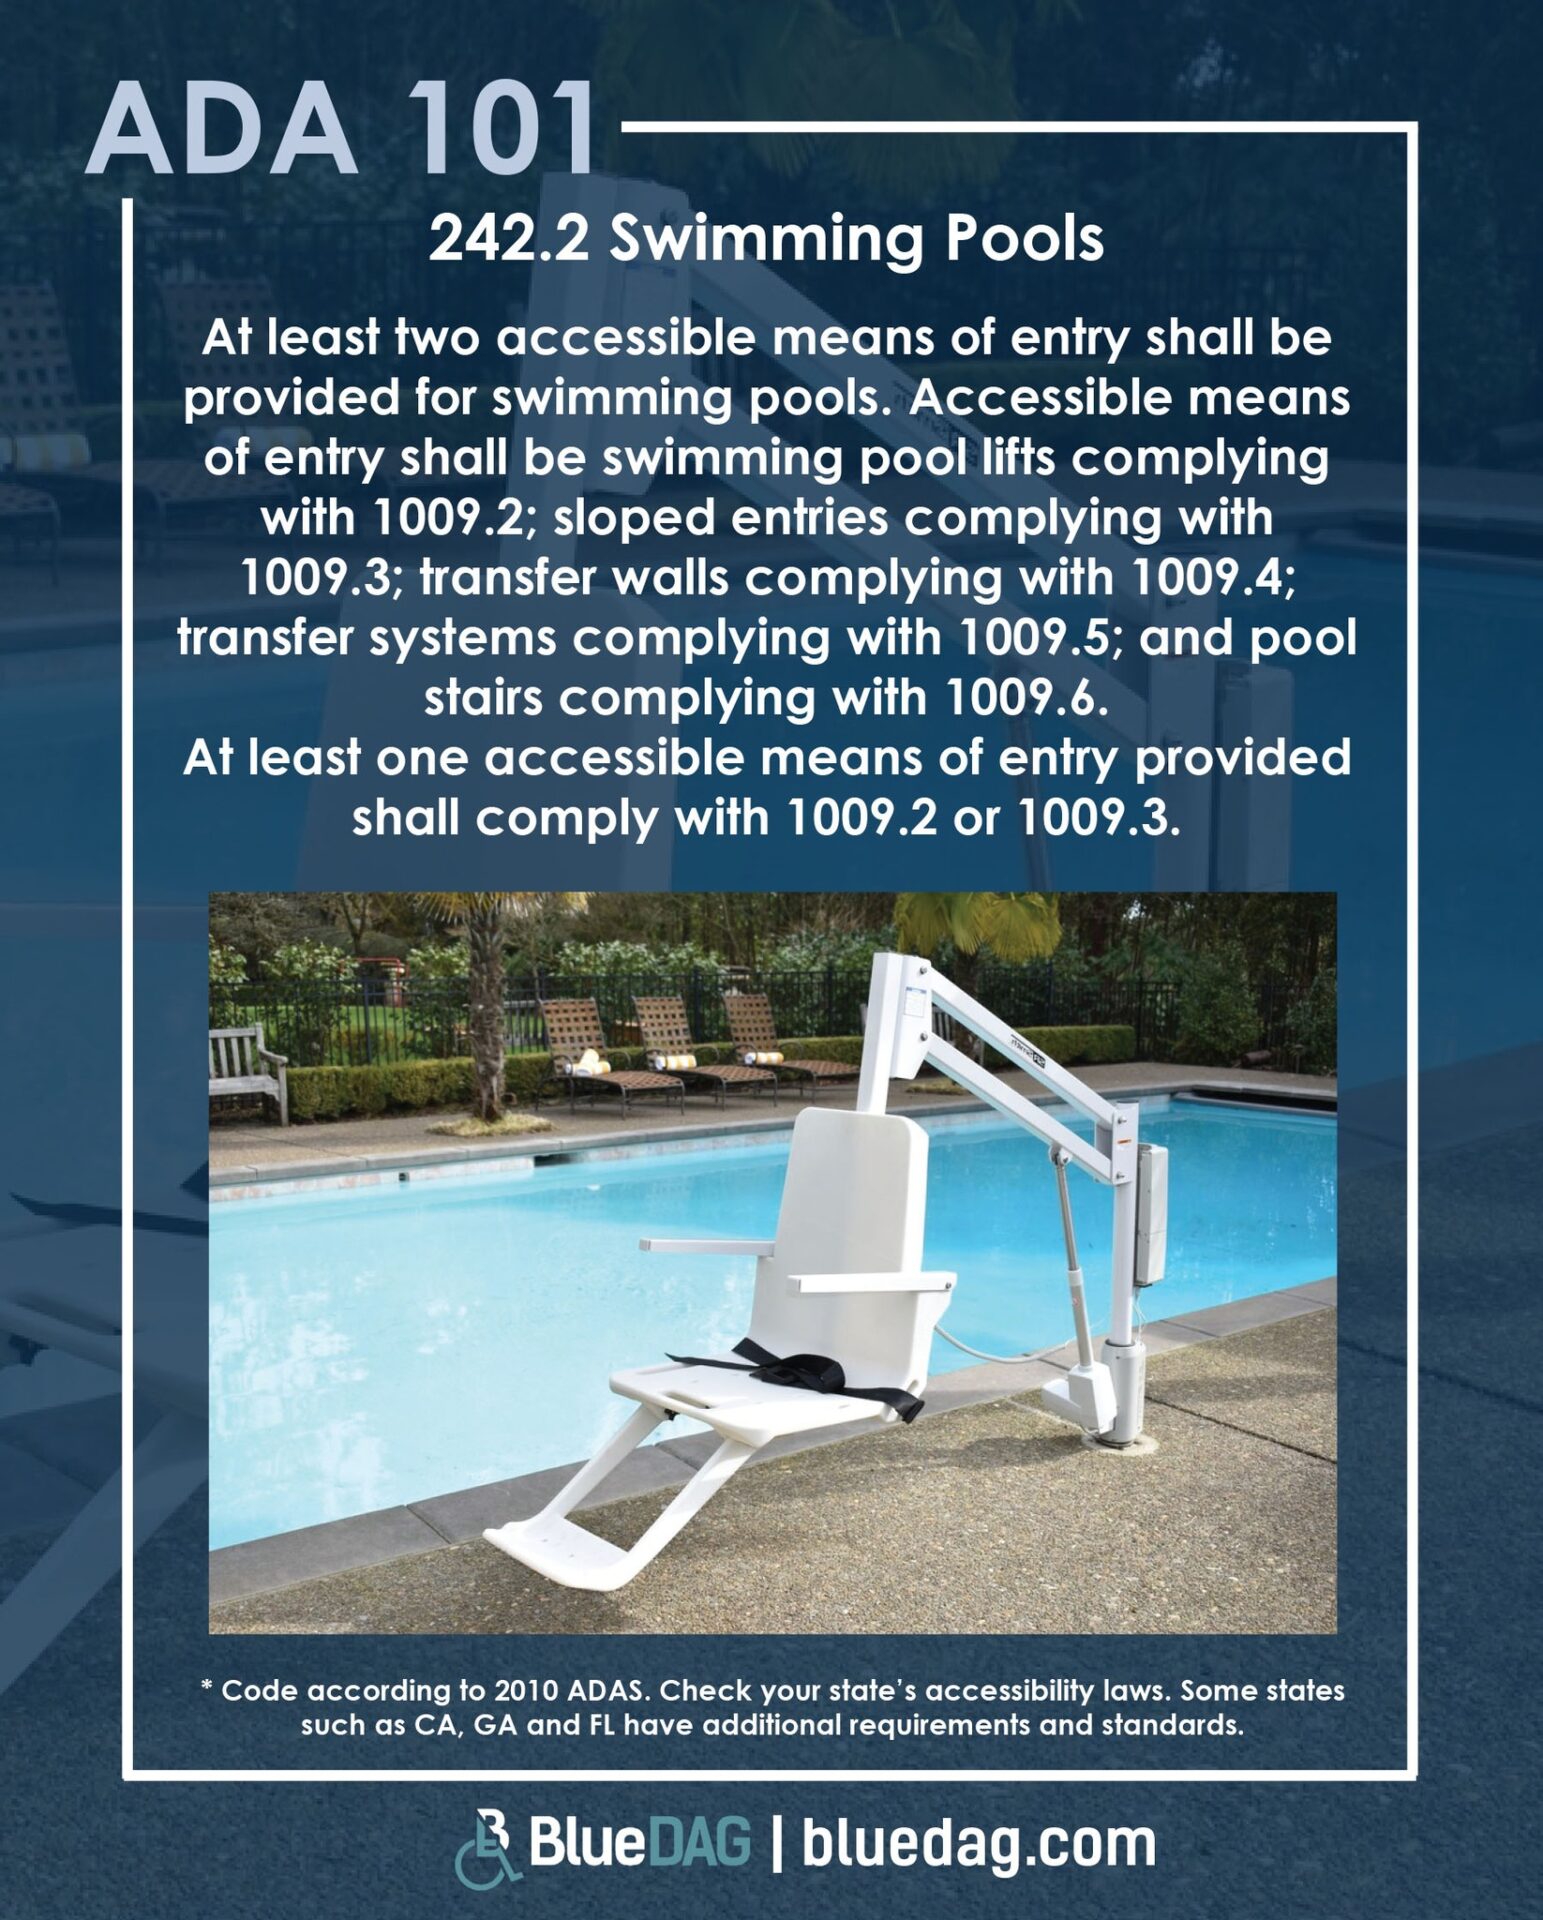 2010 ADAS 242.2 Swimming Pools At least two accessible means of entry shall be provided for swimming pools. Accessible means of entry shall be swimming pool lifts complying with 1009.2; sloped entries complying with 1009.3; transfer walls complying with 1009.4; transfer systems complying with 1009.5; and pool stairs complying with 1009.6. At least one accessible means of entry provided shall comply with 1009.2 or 1009.3. Citation according to 2010 ADAS. Check your state’s accessibility laws. Some states such as California, Georgia and Florida have additional requirements and standards.